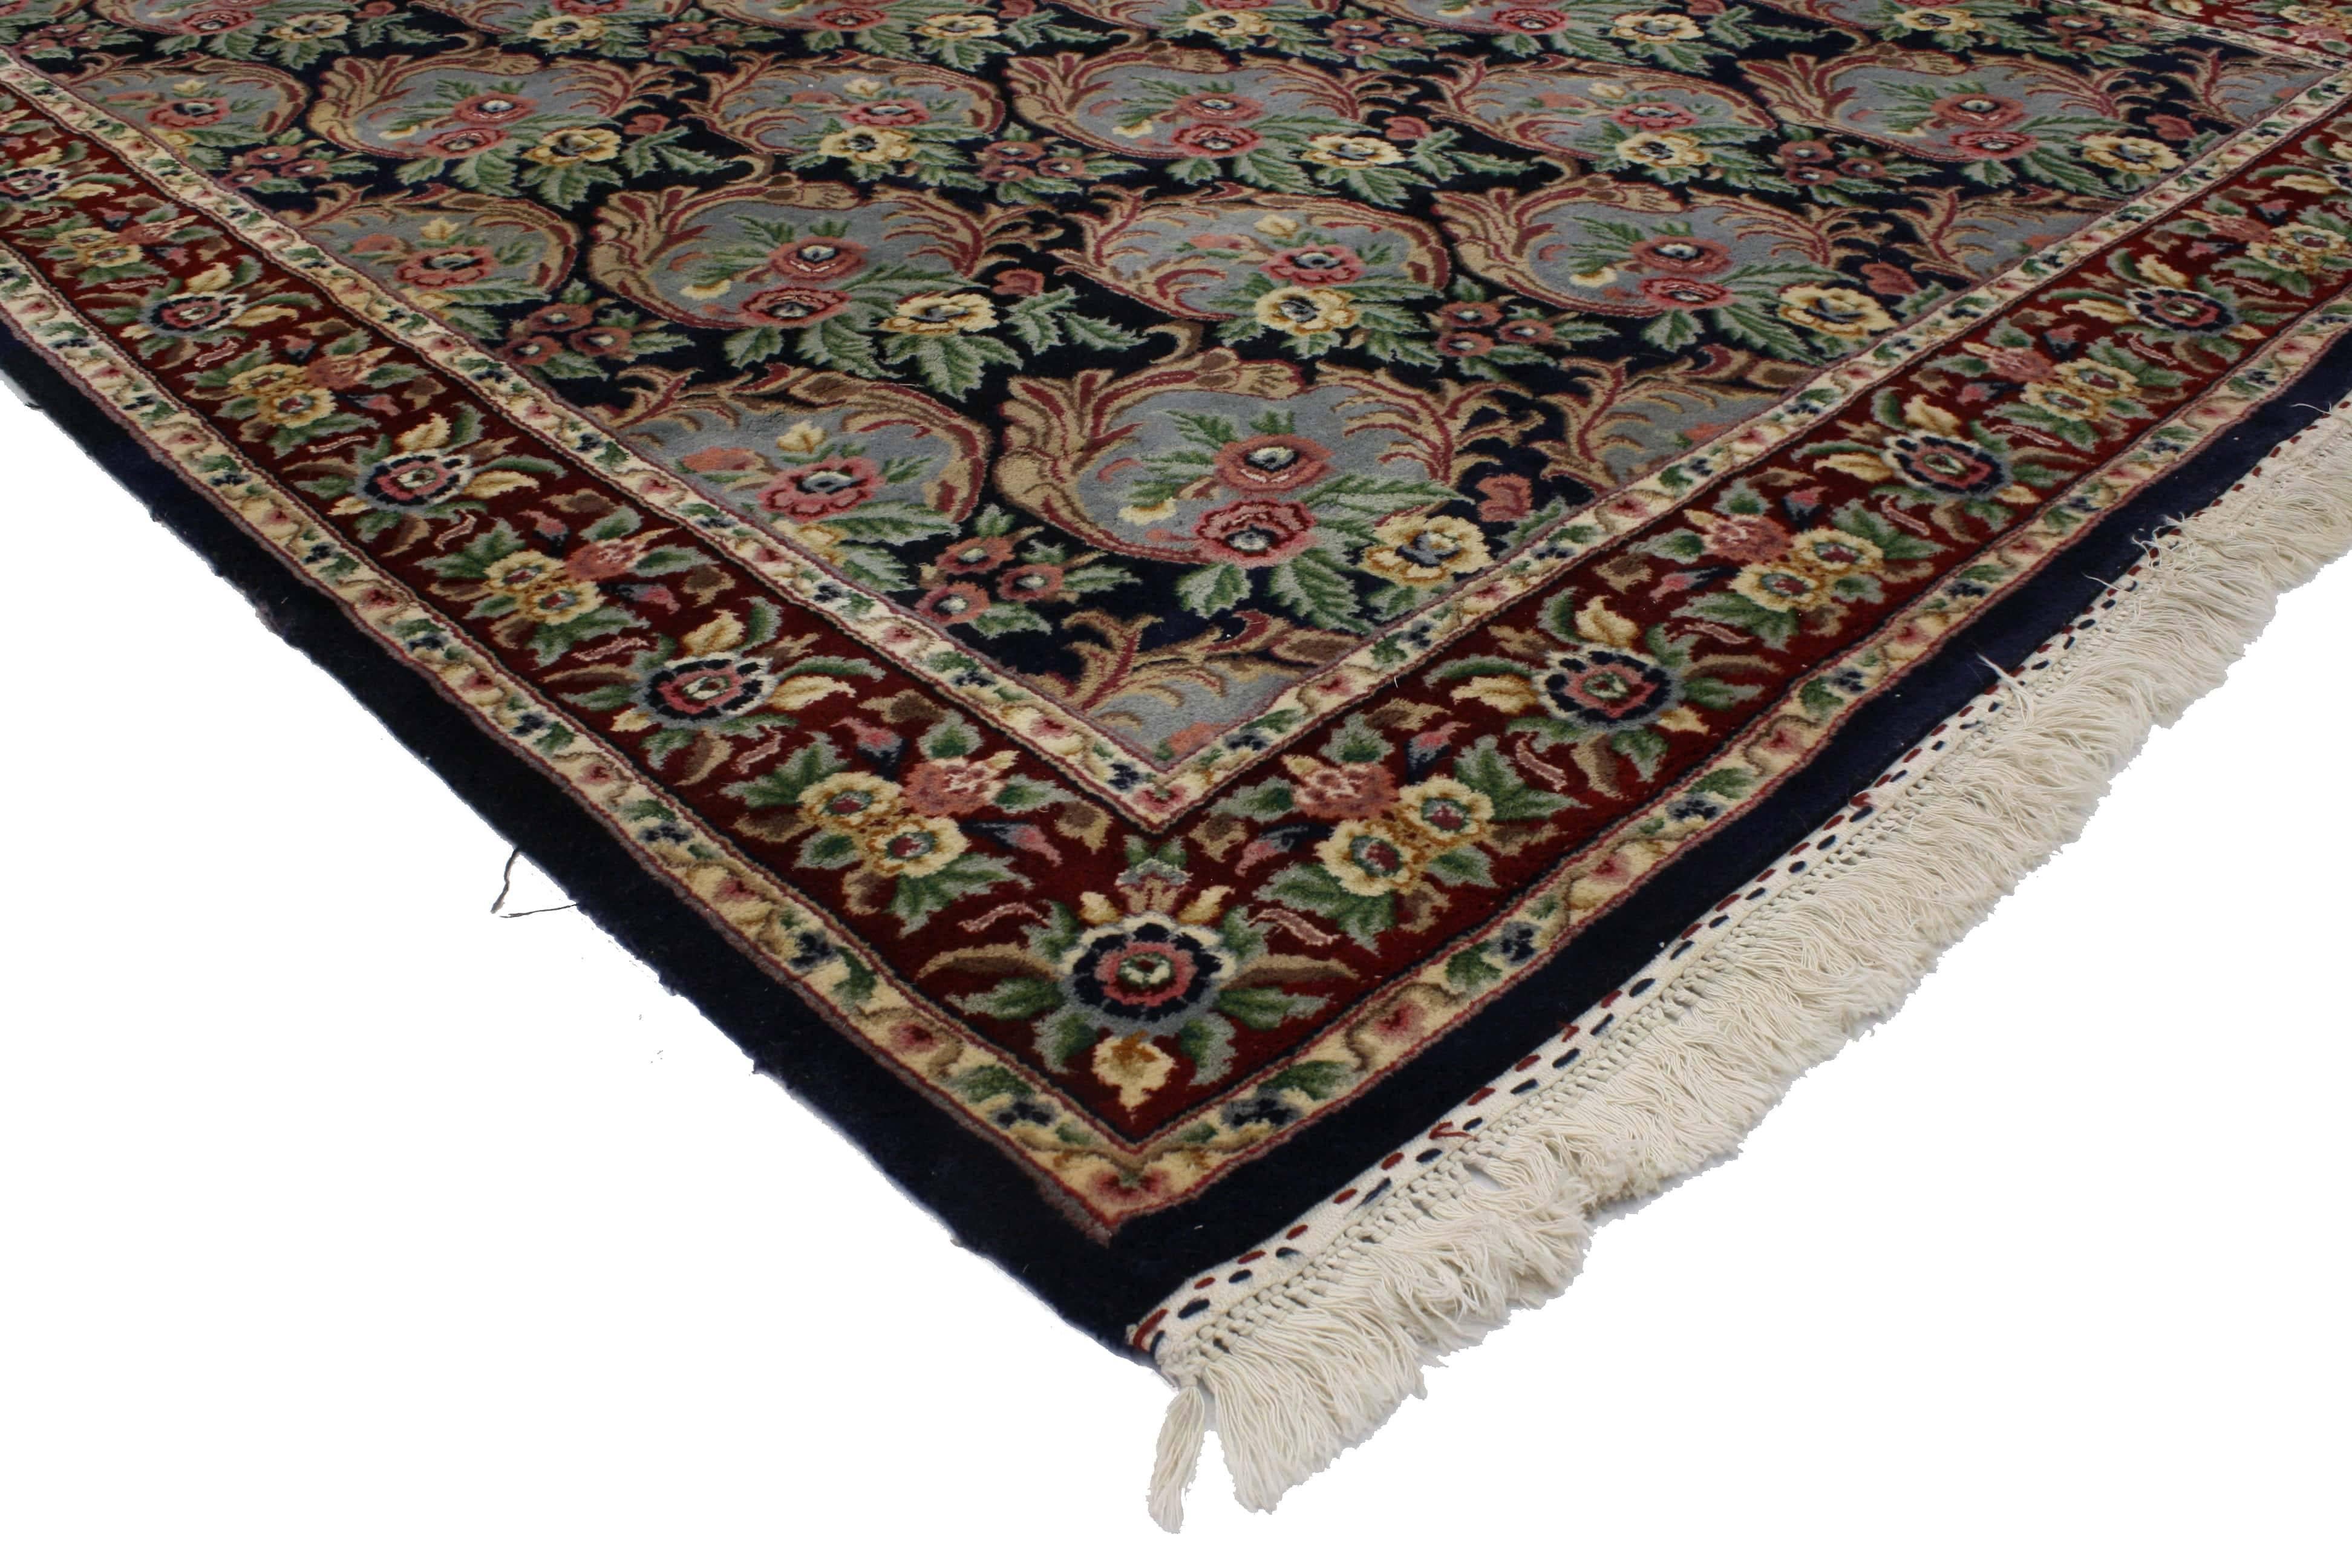 76702, vintage American Colonial style Indian area rug with framed flowers. Delicately arranged flower bunches sit framed by a foliate oval in each pattern that covers the field of this beautiful vintage Indian rug with Colonial style. This vintage